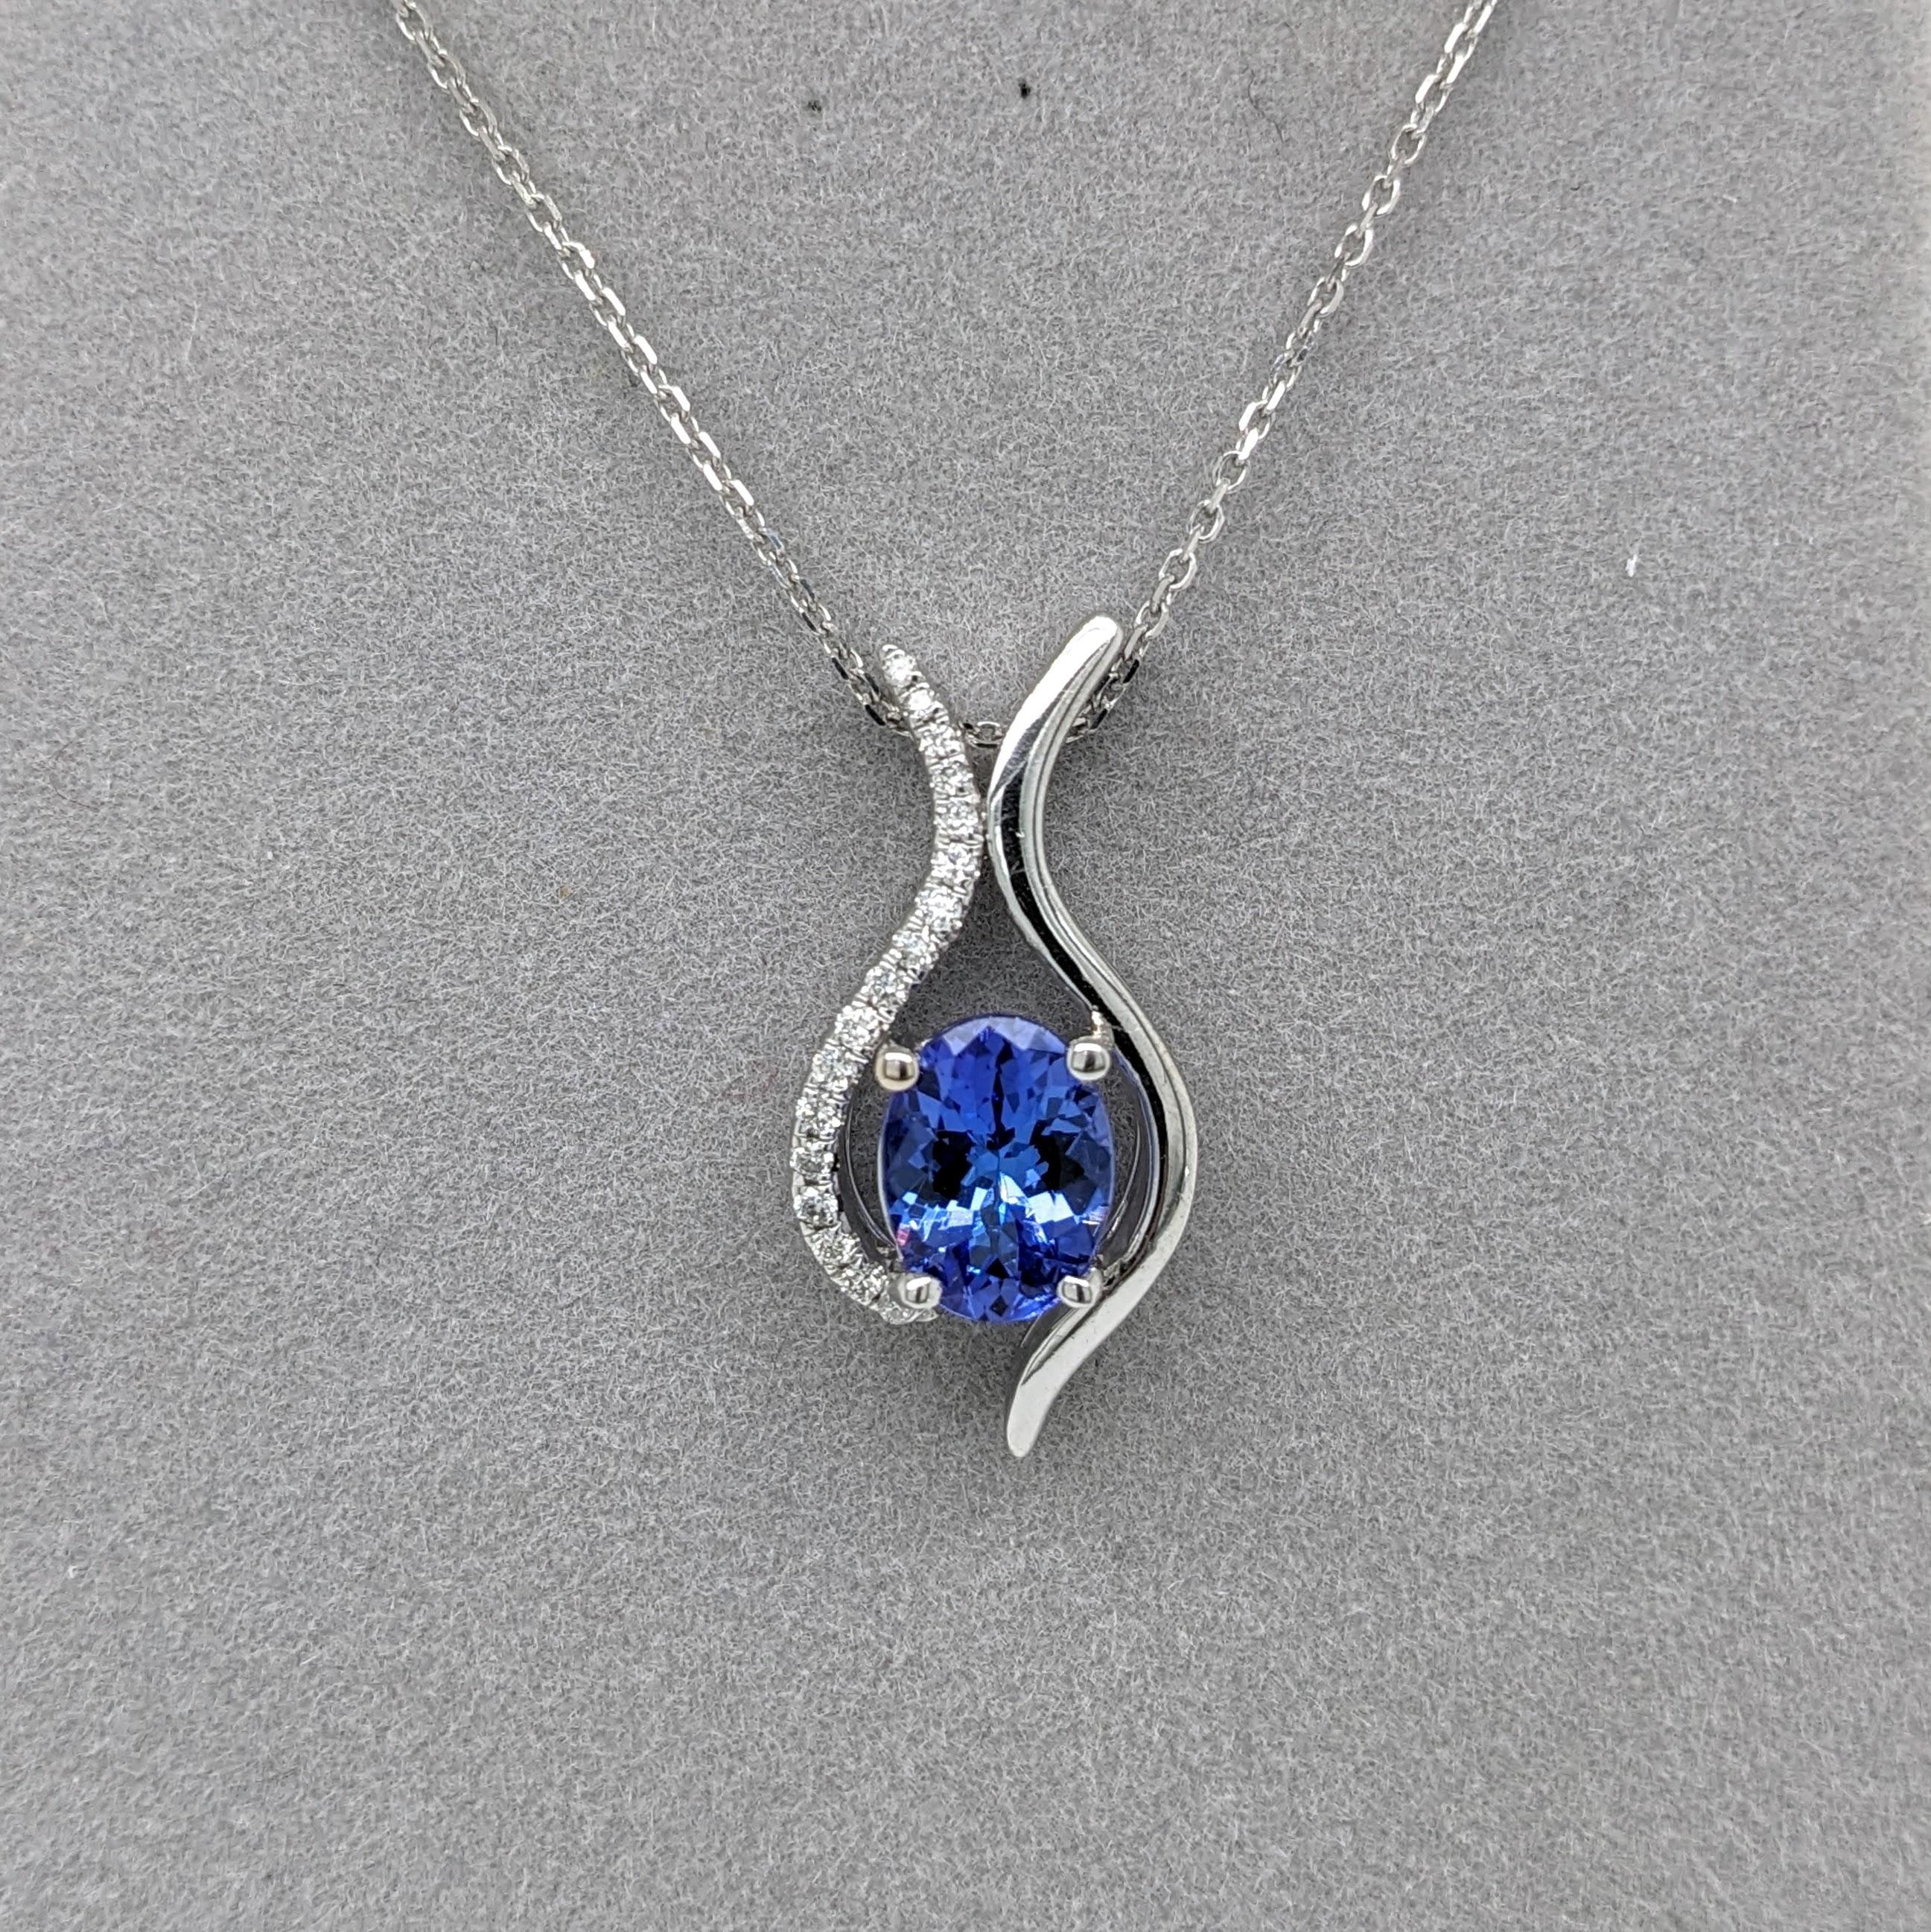 Oval Cut 1.2ct Tanzanite Pendant w Earth Mined Diamonds in Solid 14K White Gold Oval 8x6 For Sale